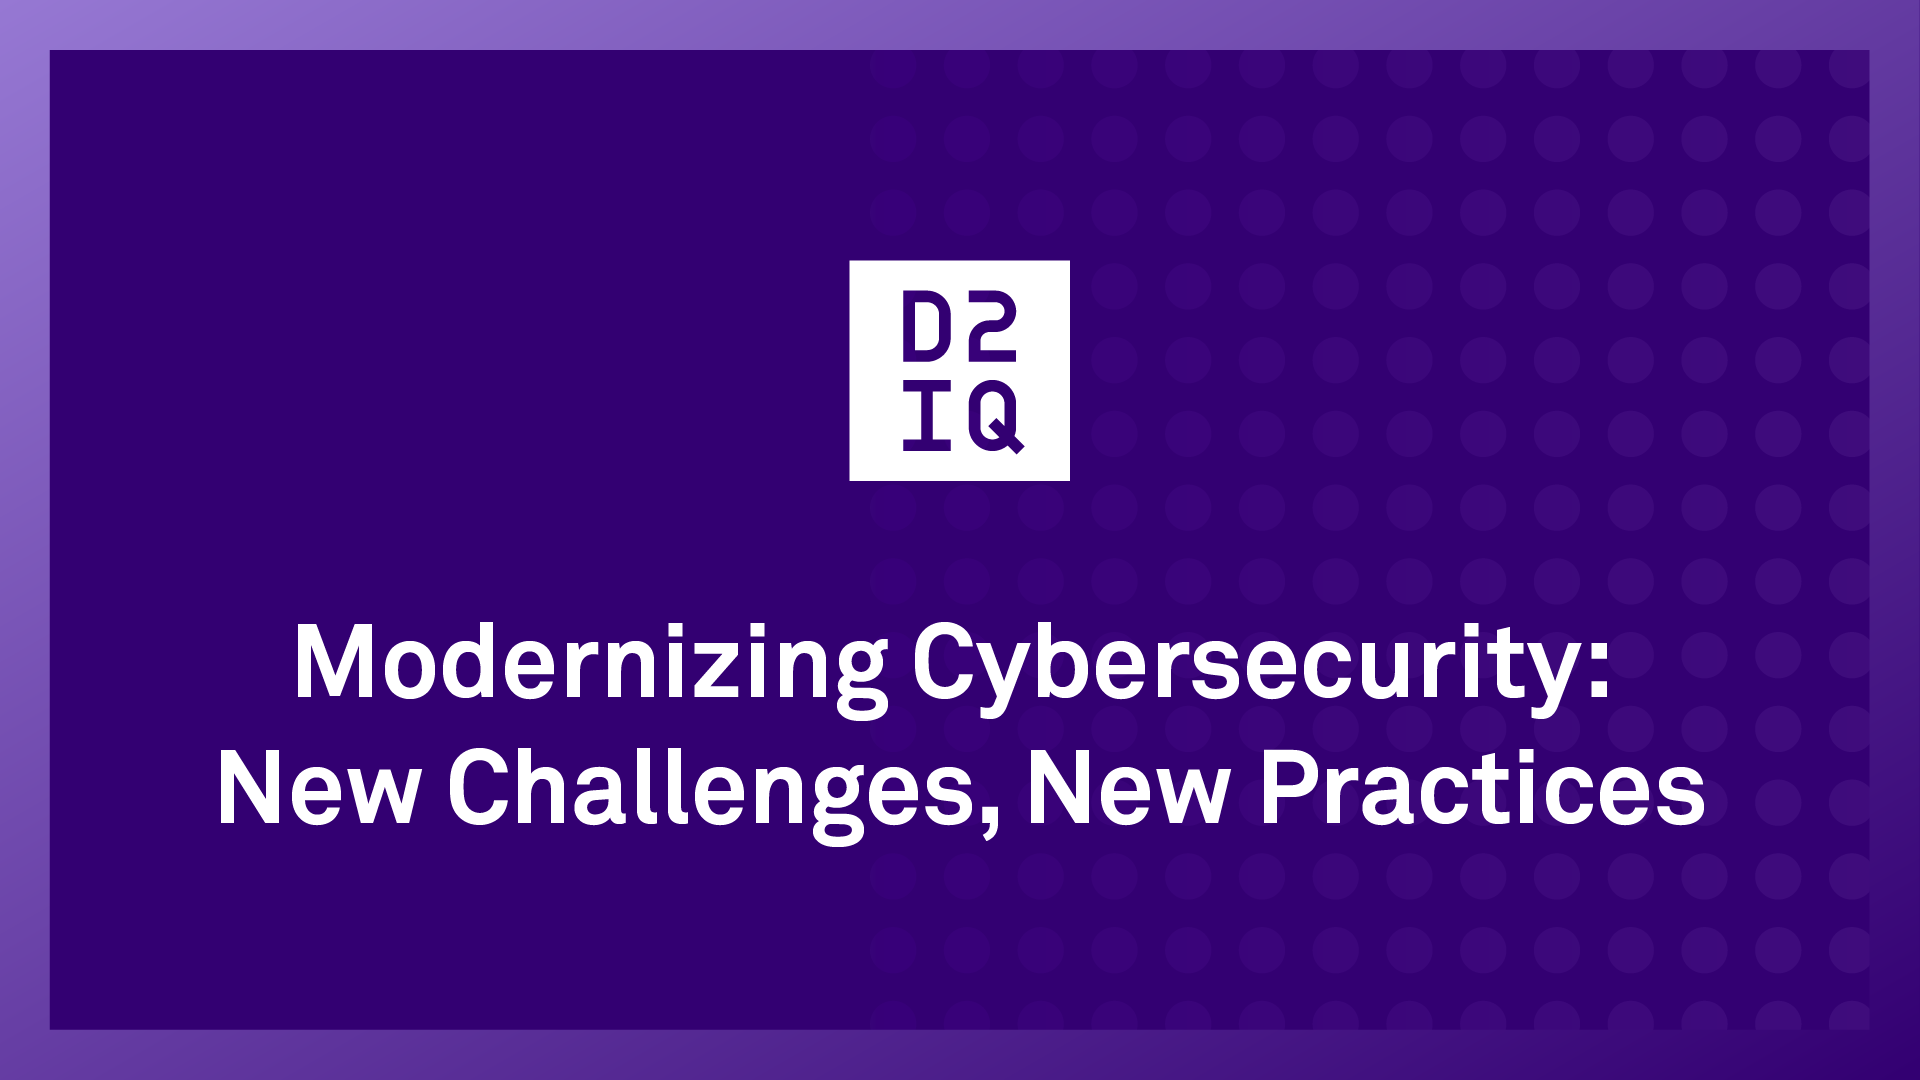 Modernizing Cybersecurity: New Challenges, New Practices